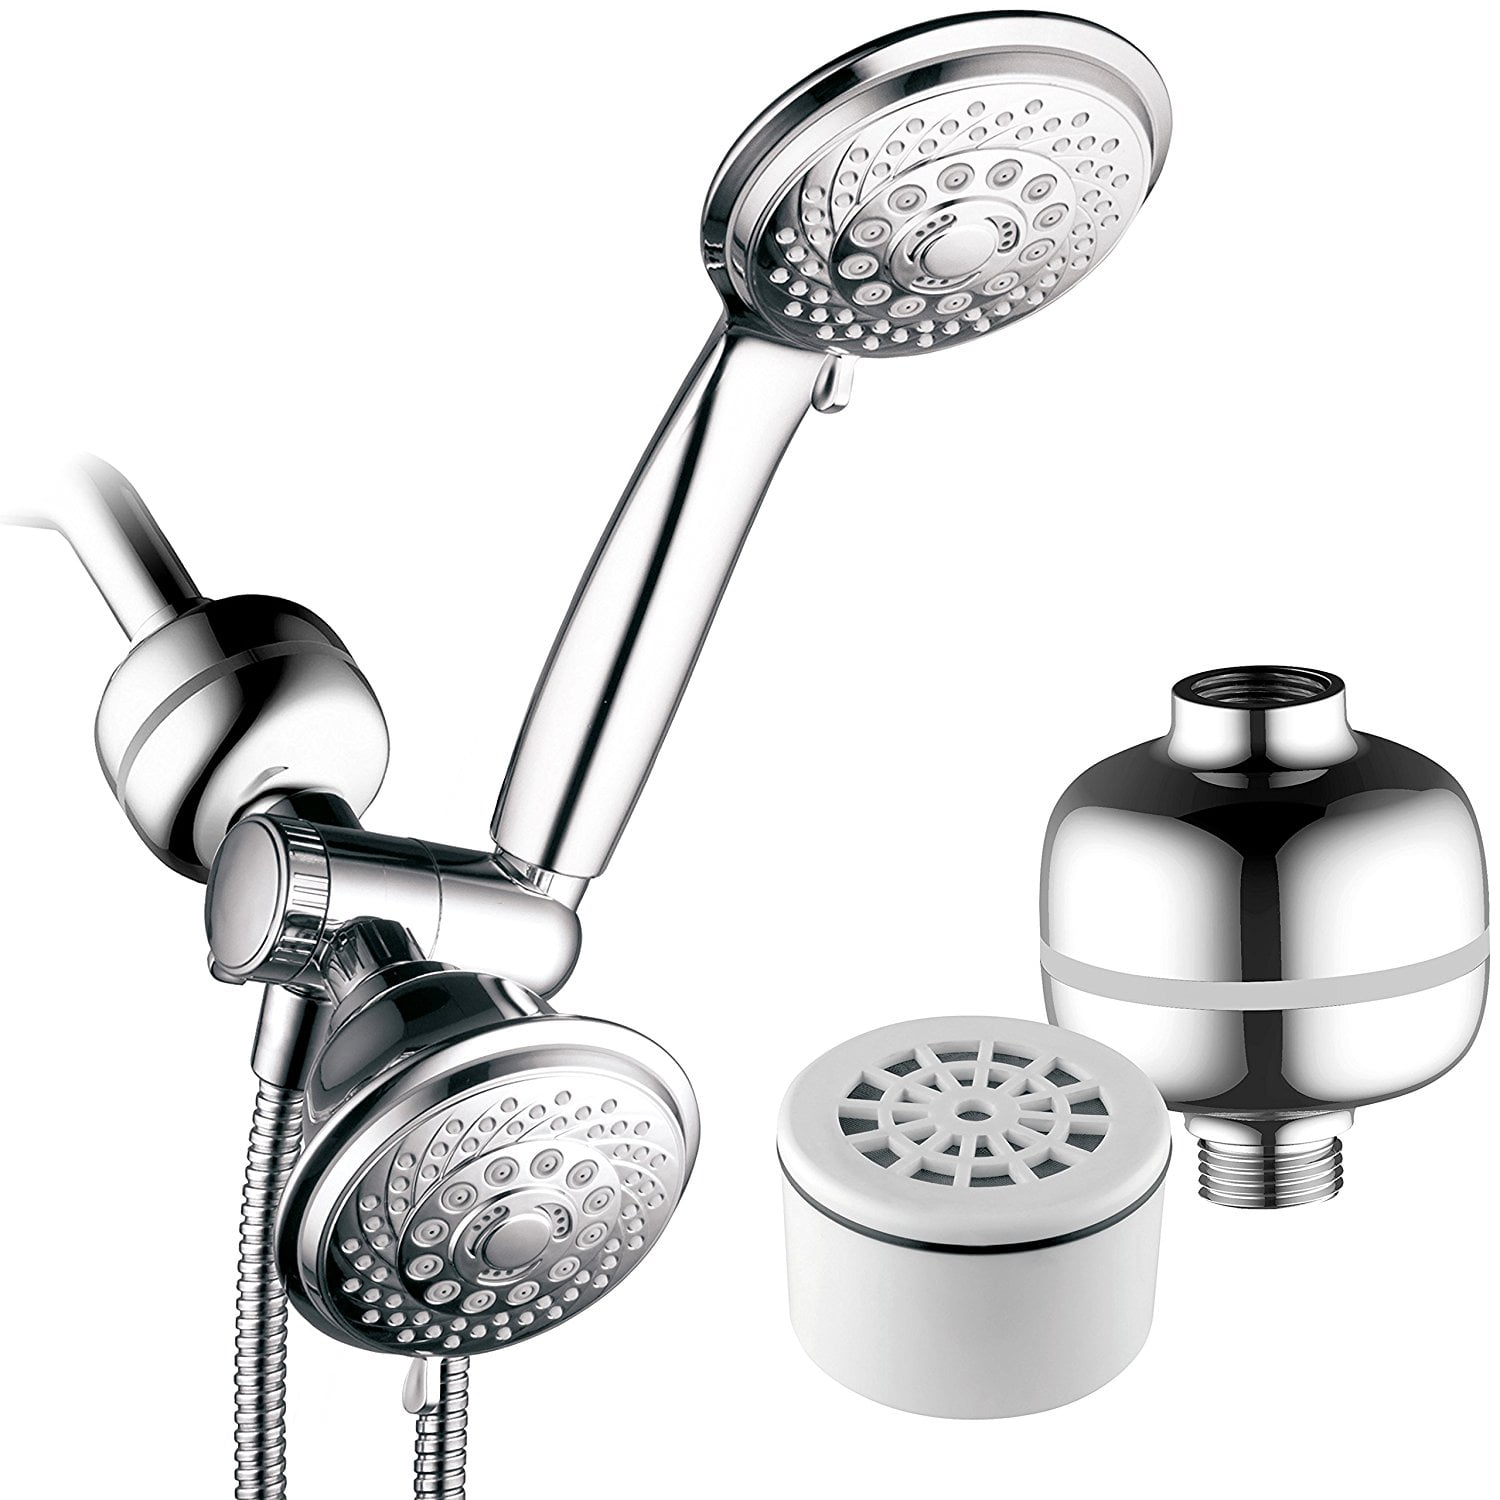 HotelSpa® 30-Setting Ultra-Luxury 3 Way Rainfall Shower-Head/Handheld Shower Combo with Patented ON/OFF Pause Switch Dual White/Chrome Finish